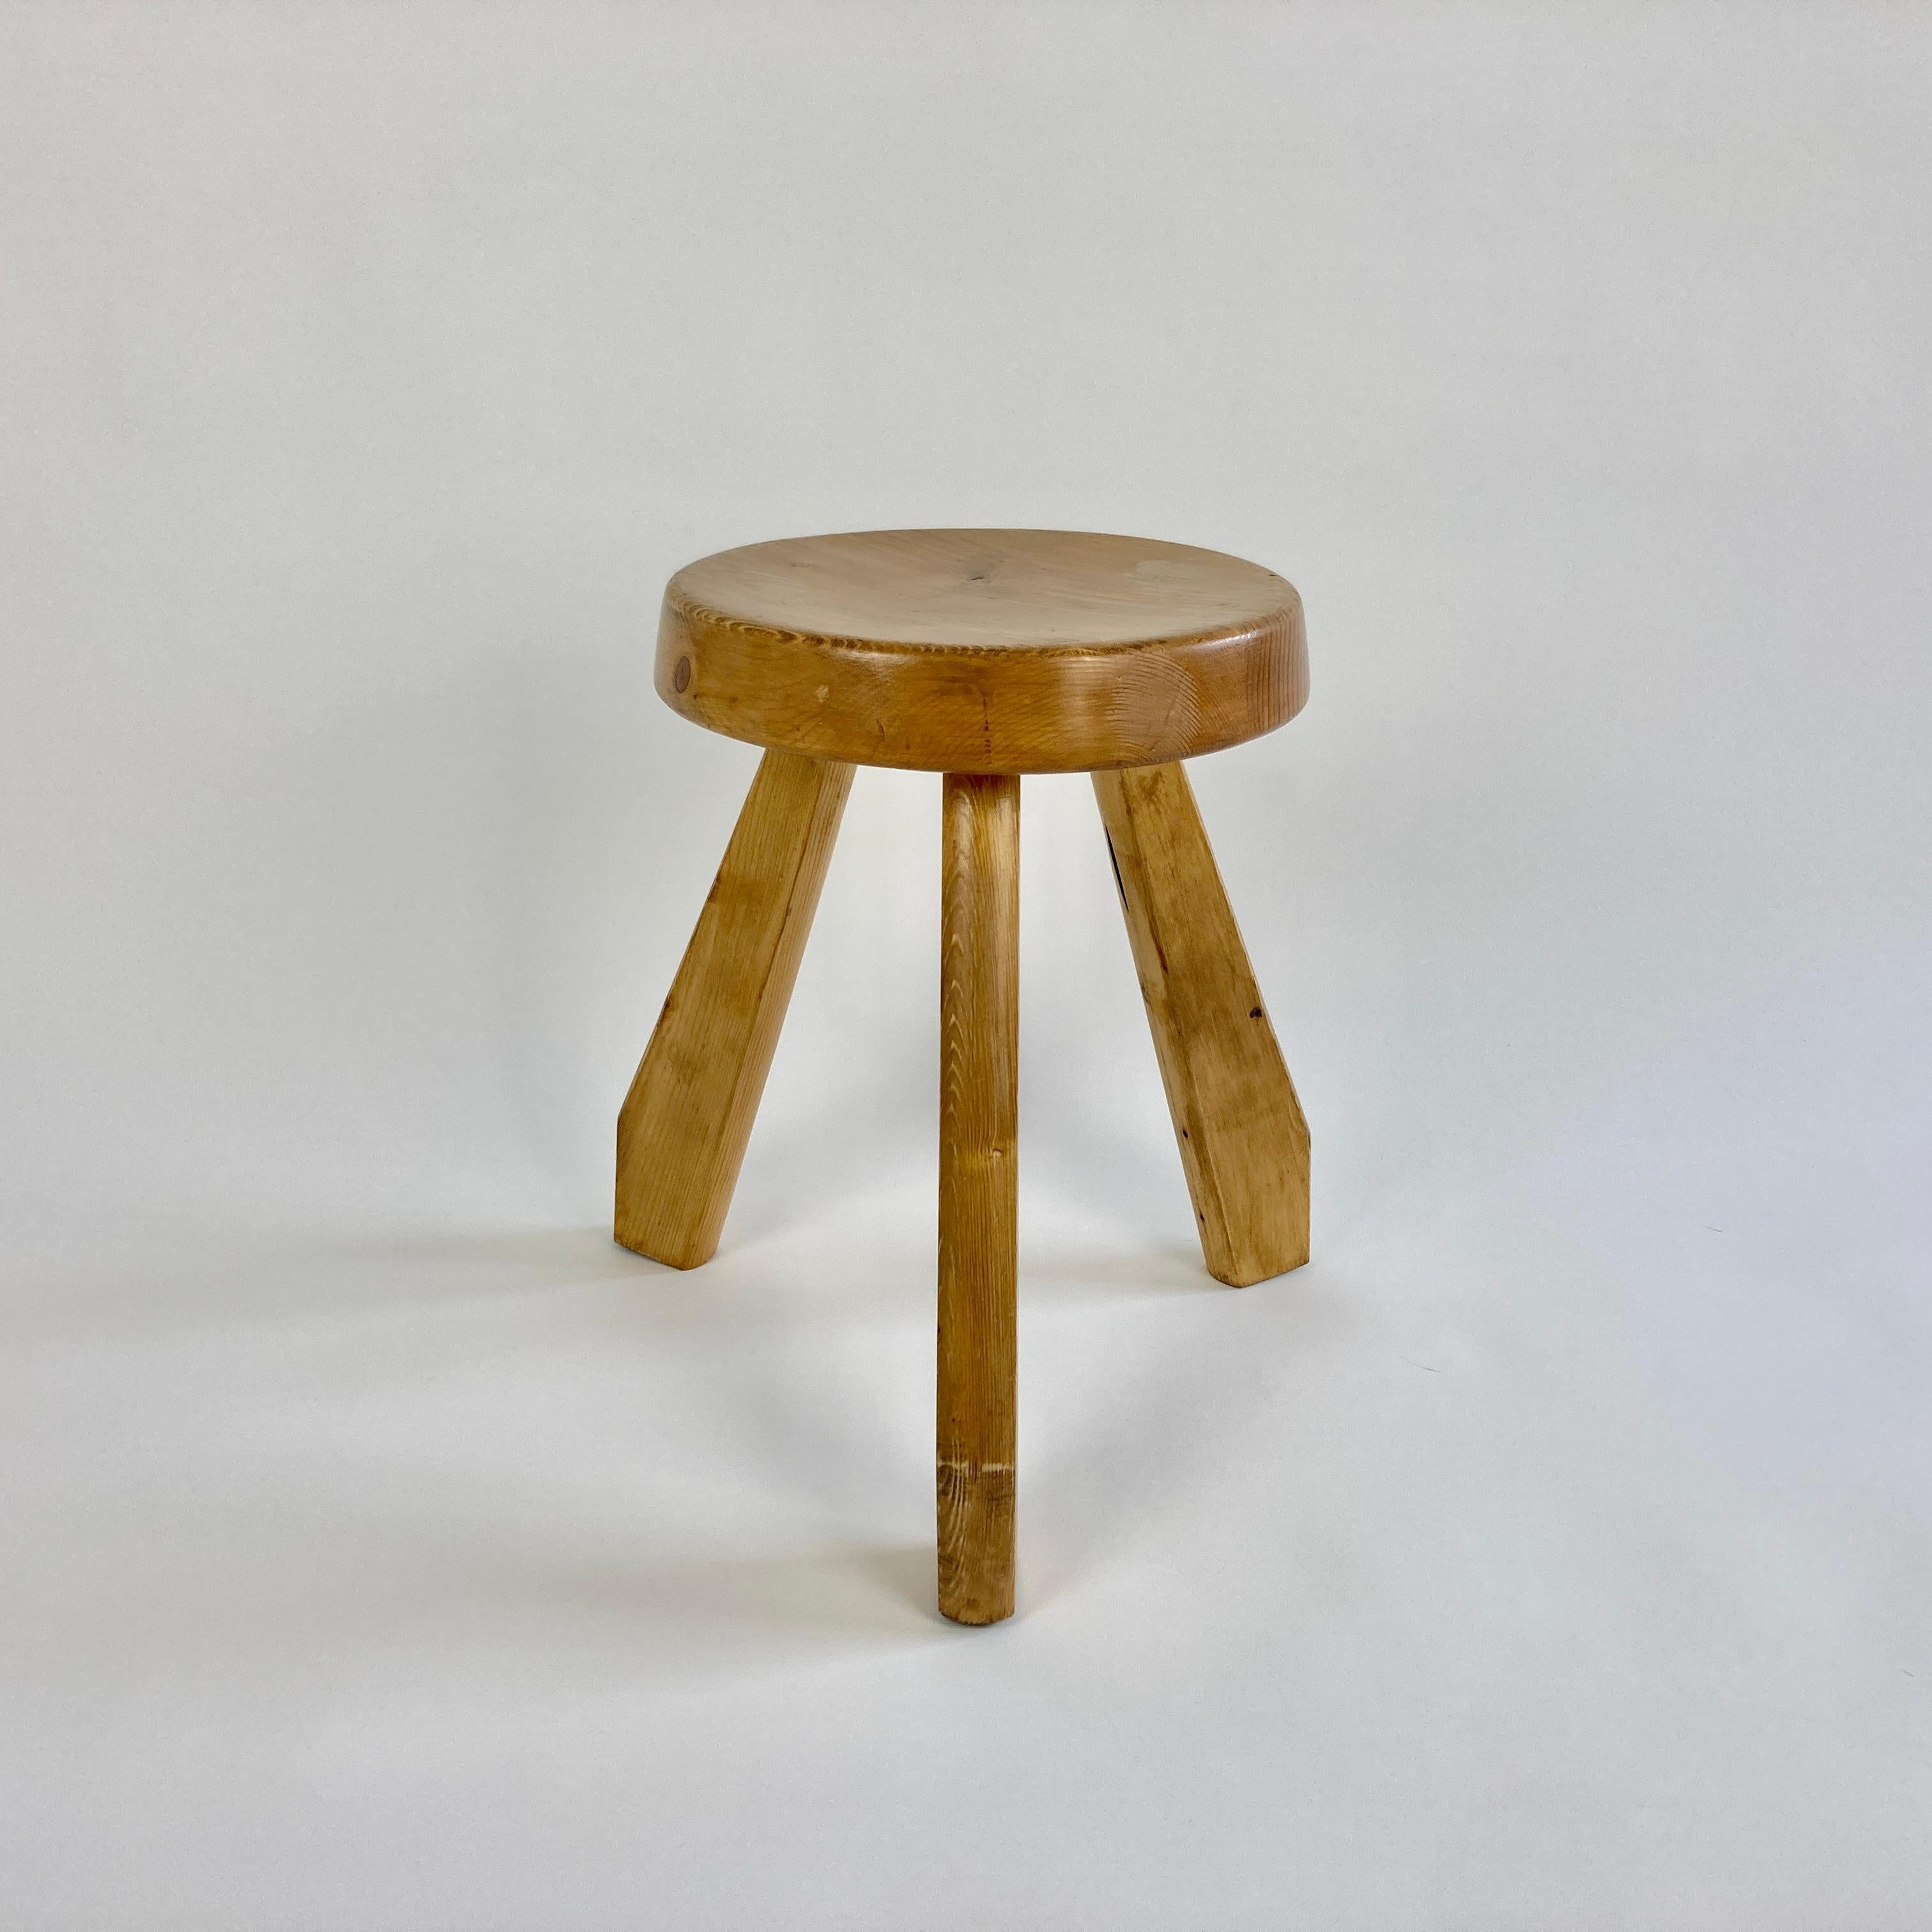 French Les Arcs Sandoz Stool by Charlotte Perriand, France 1960s